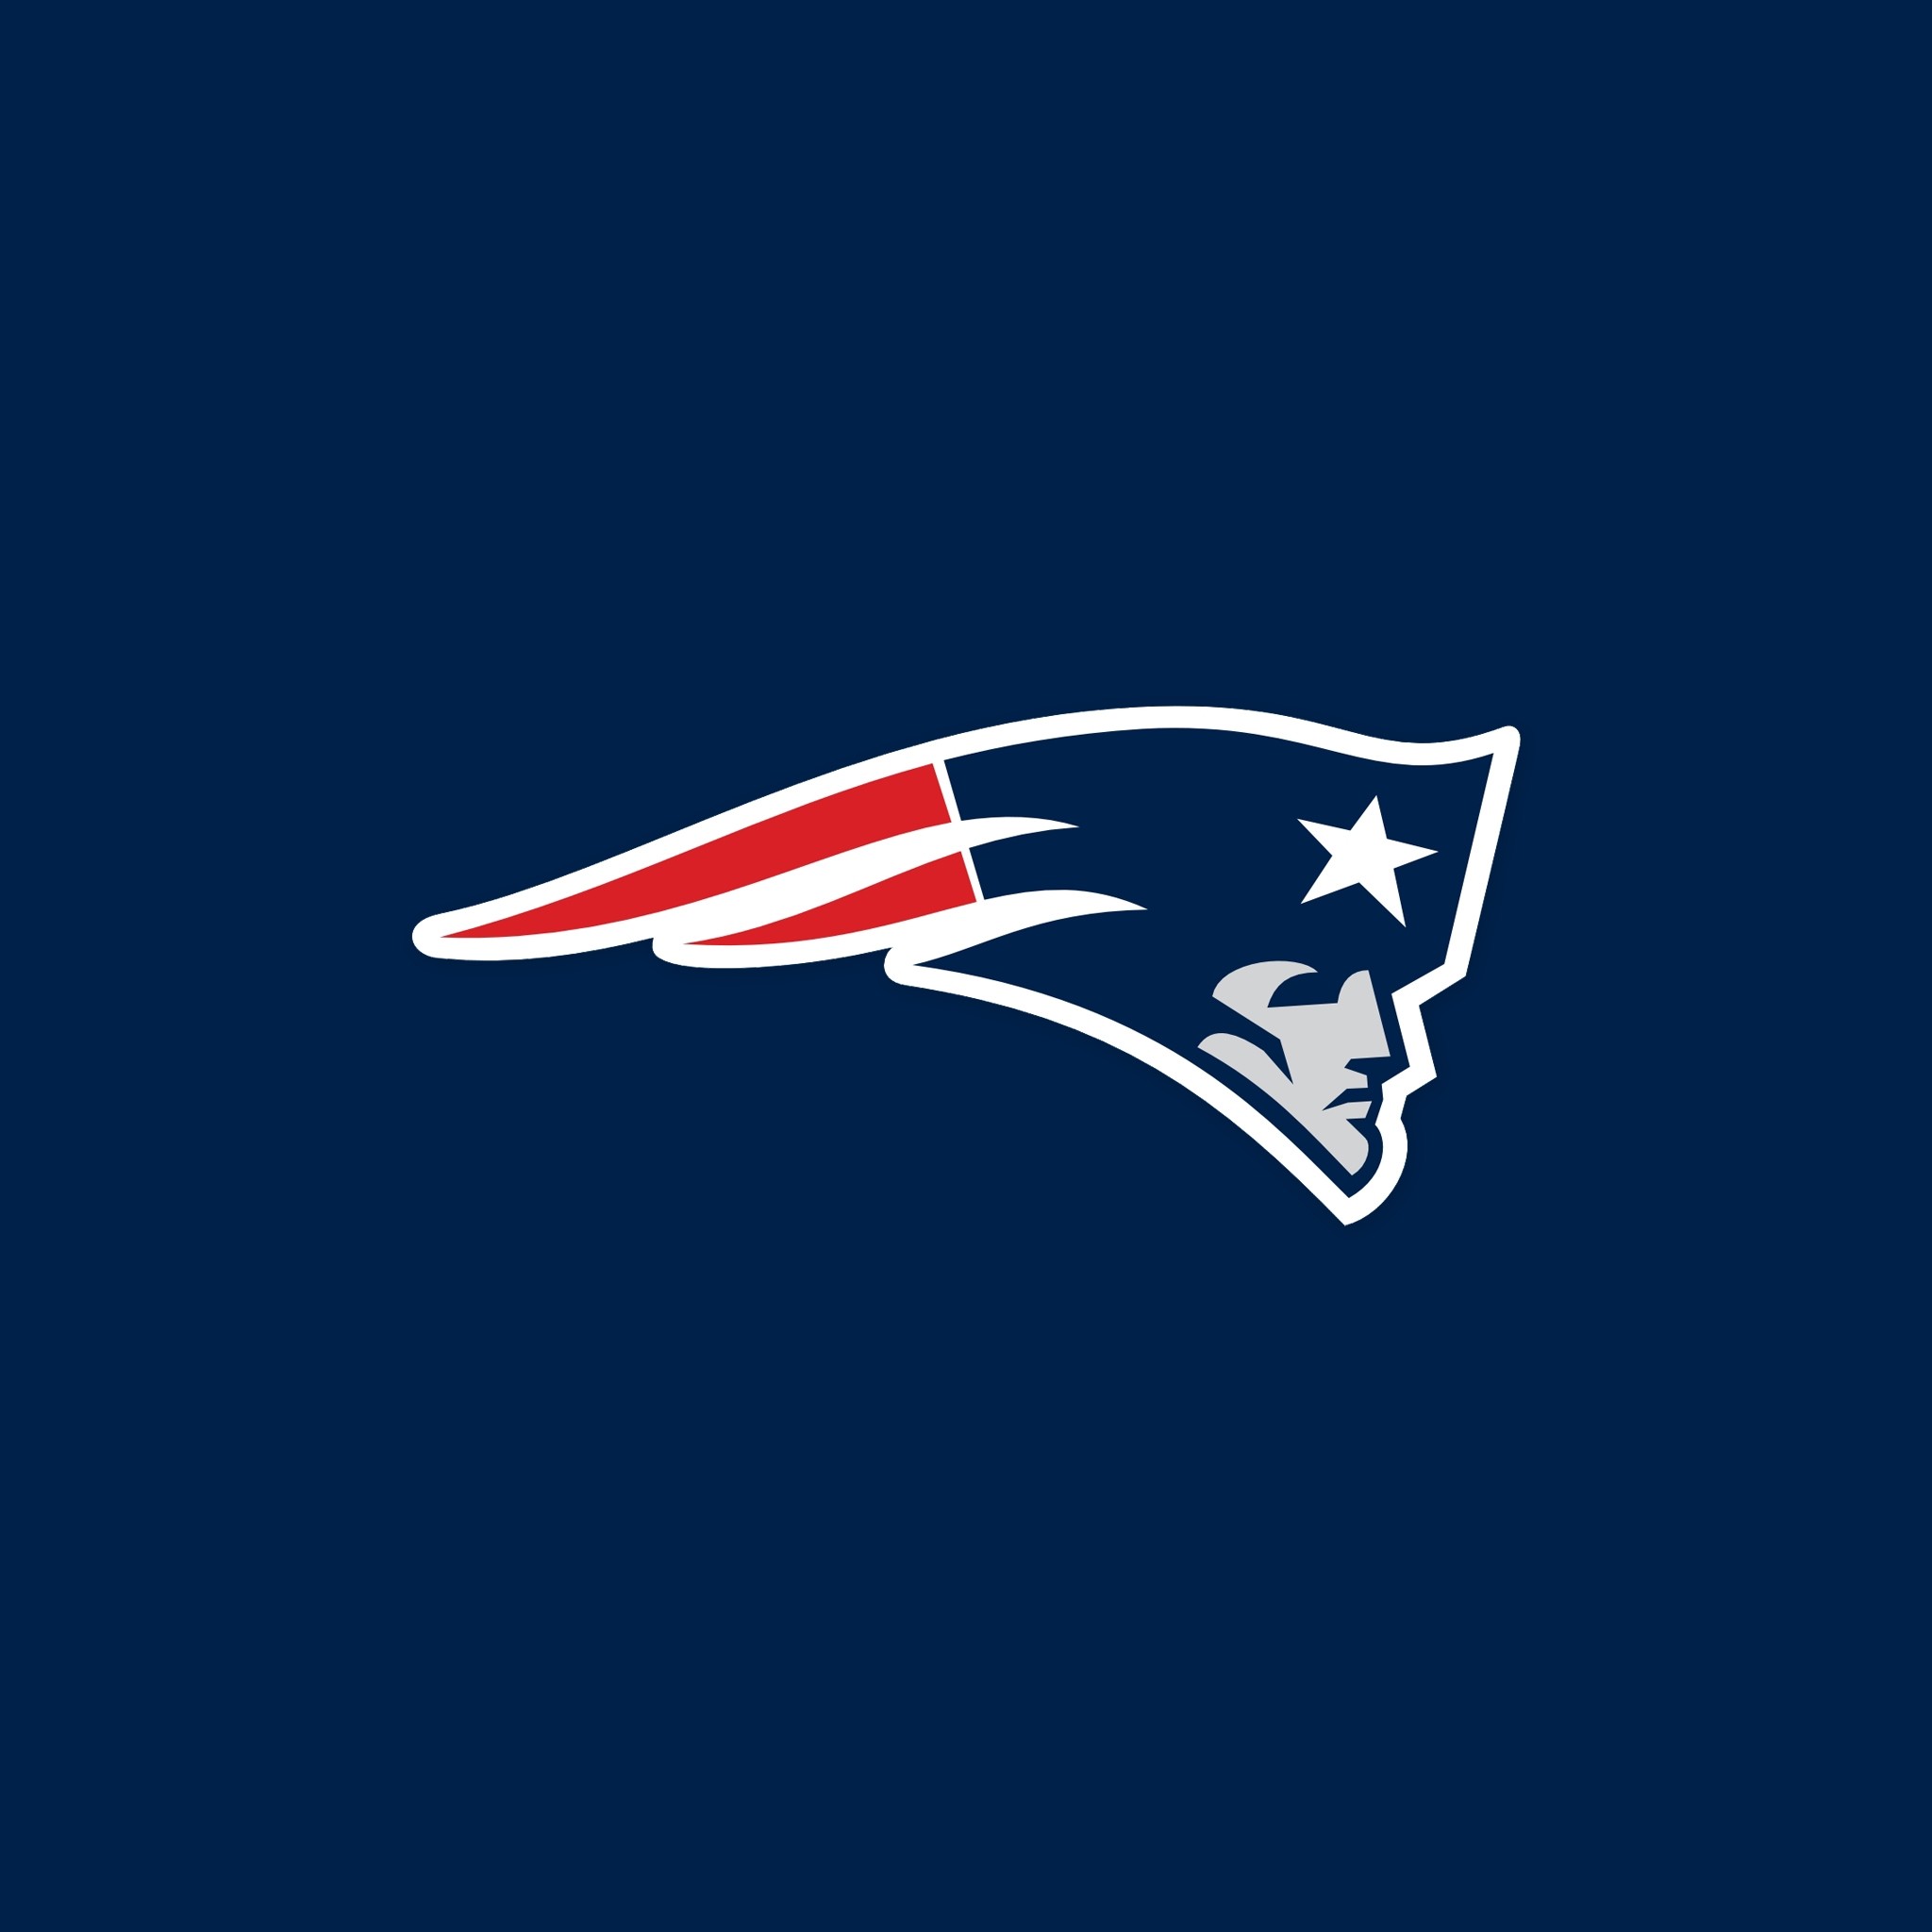 2048x2048 ... Wallpaper Weekends: Super Bowl Sunday Wallpapers for the iPhone and iPad